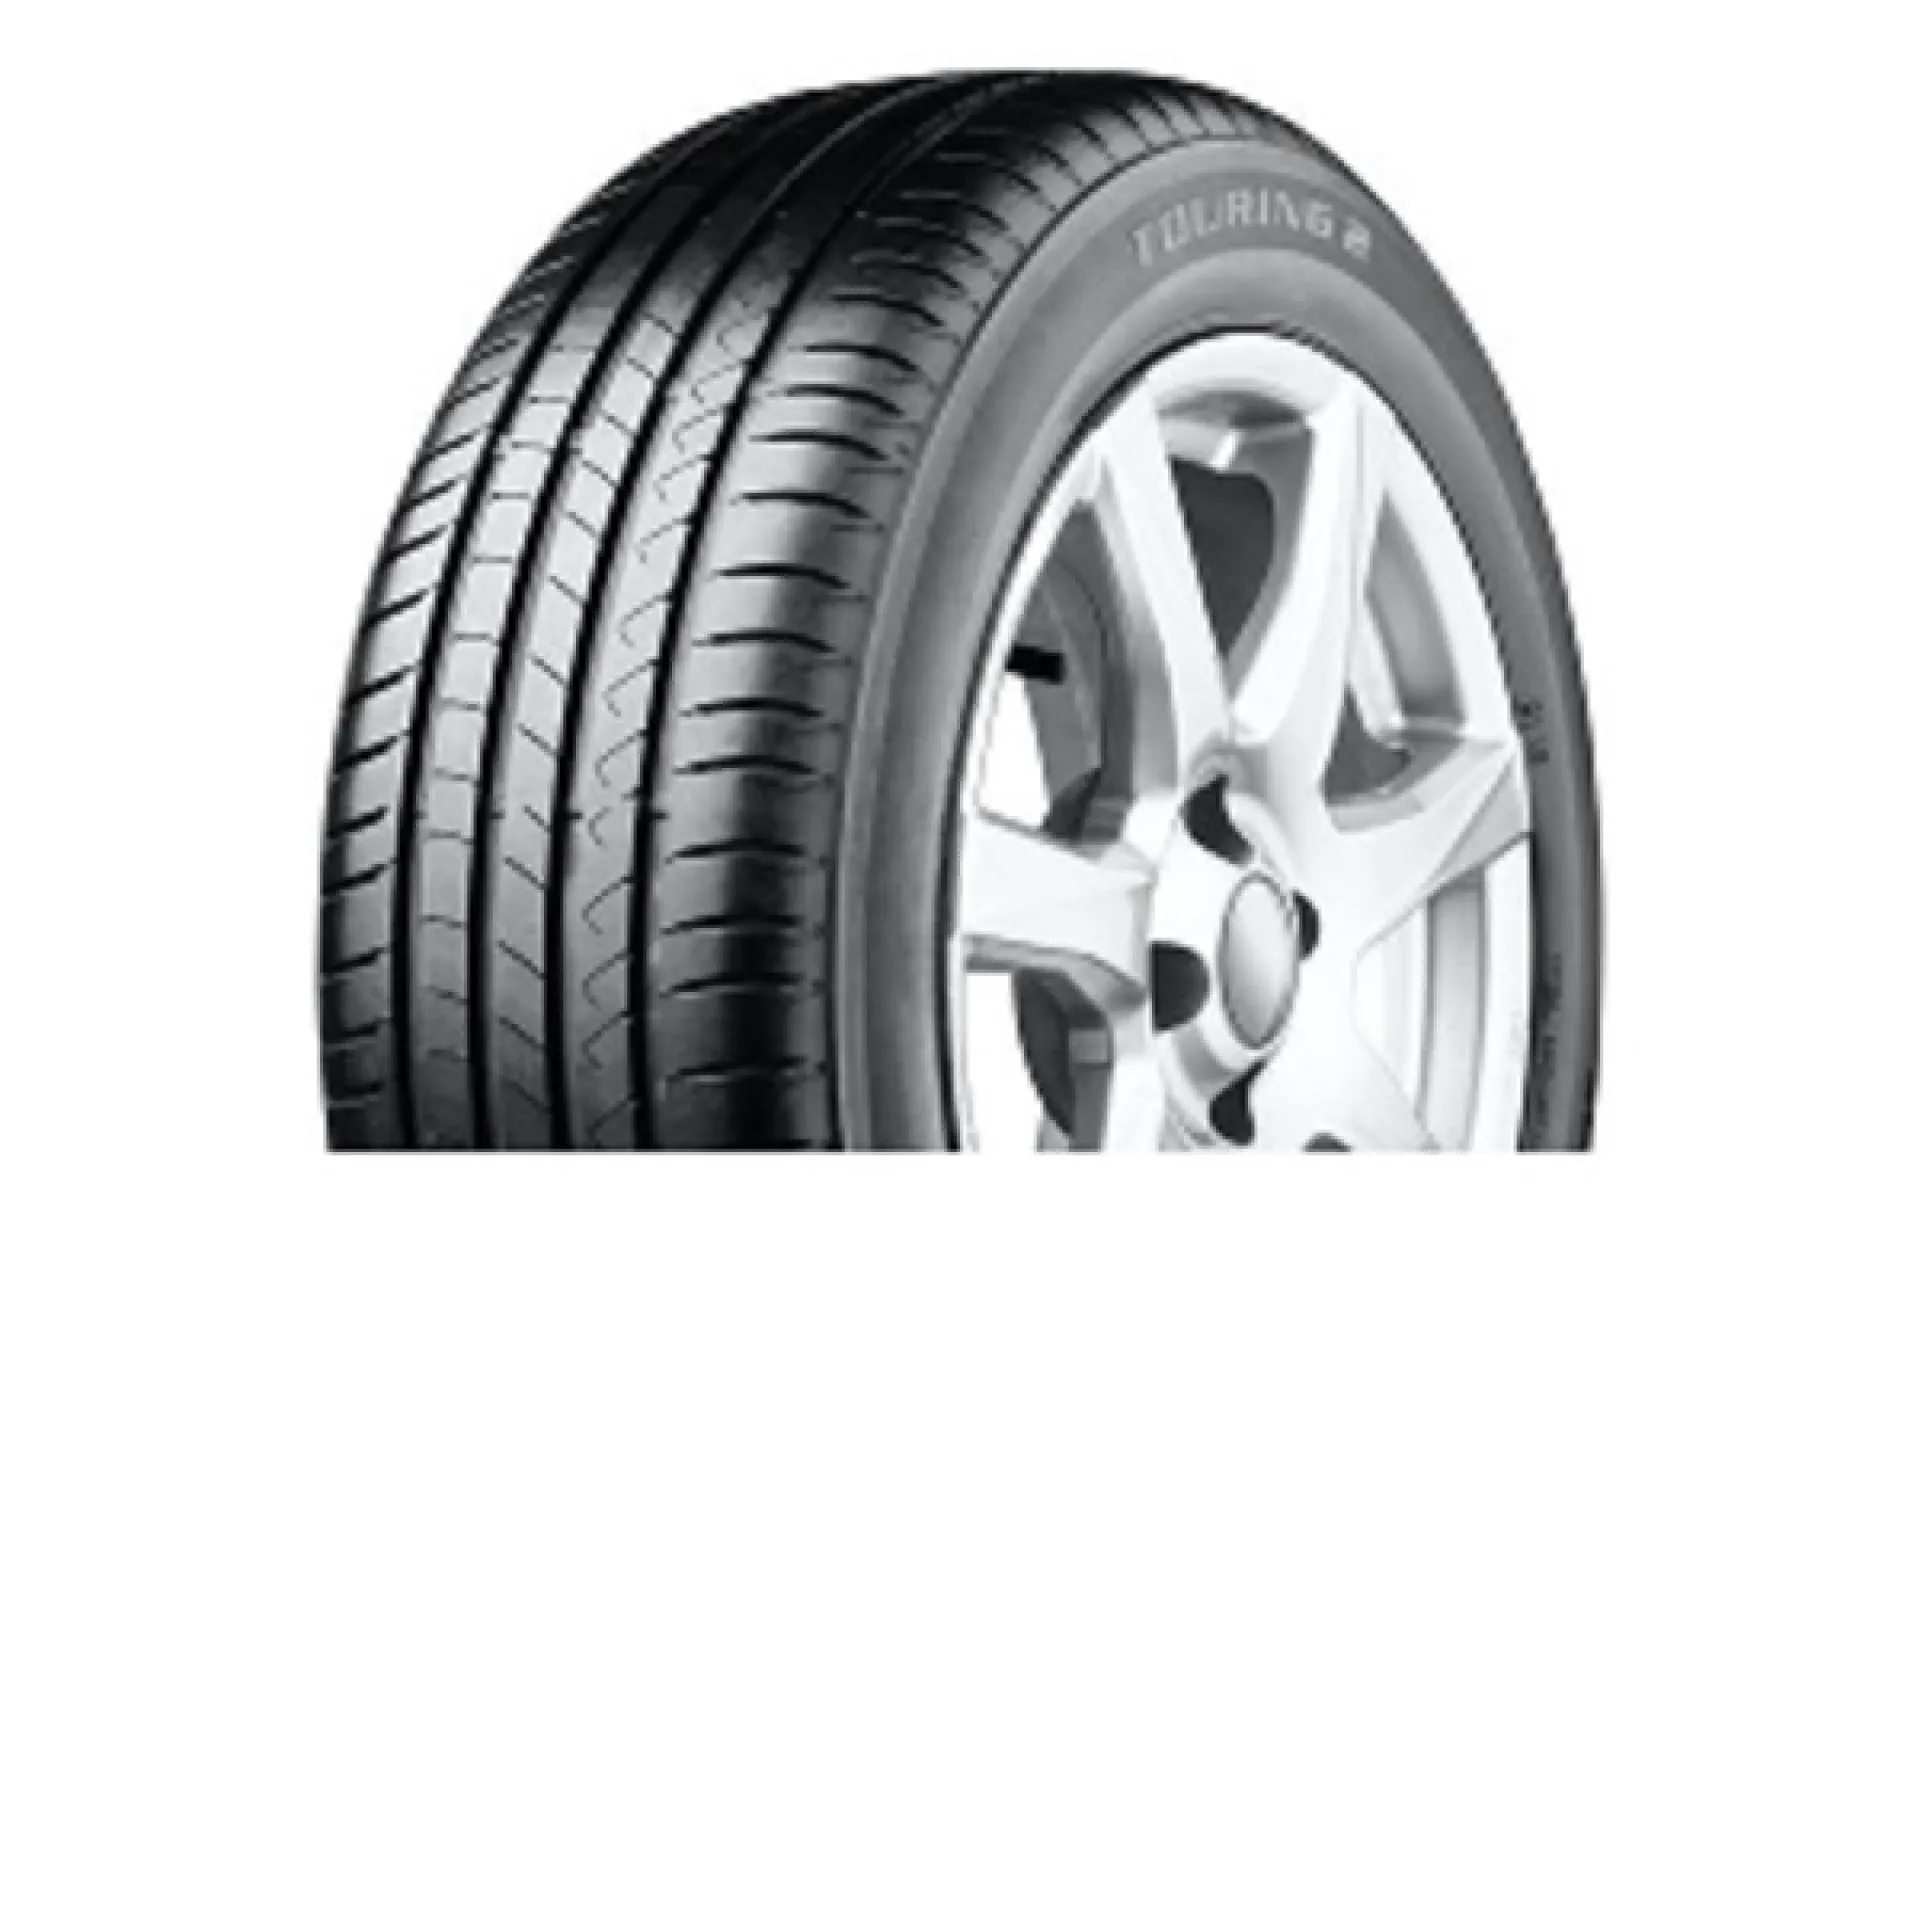 Seiberling Touring 2 195/65R15 91T